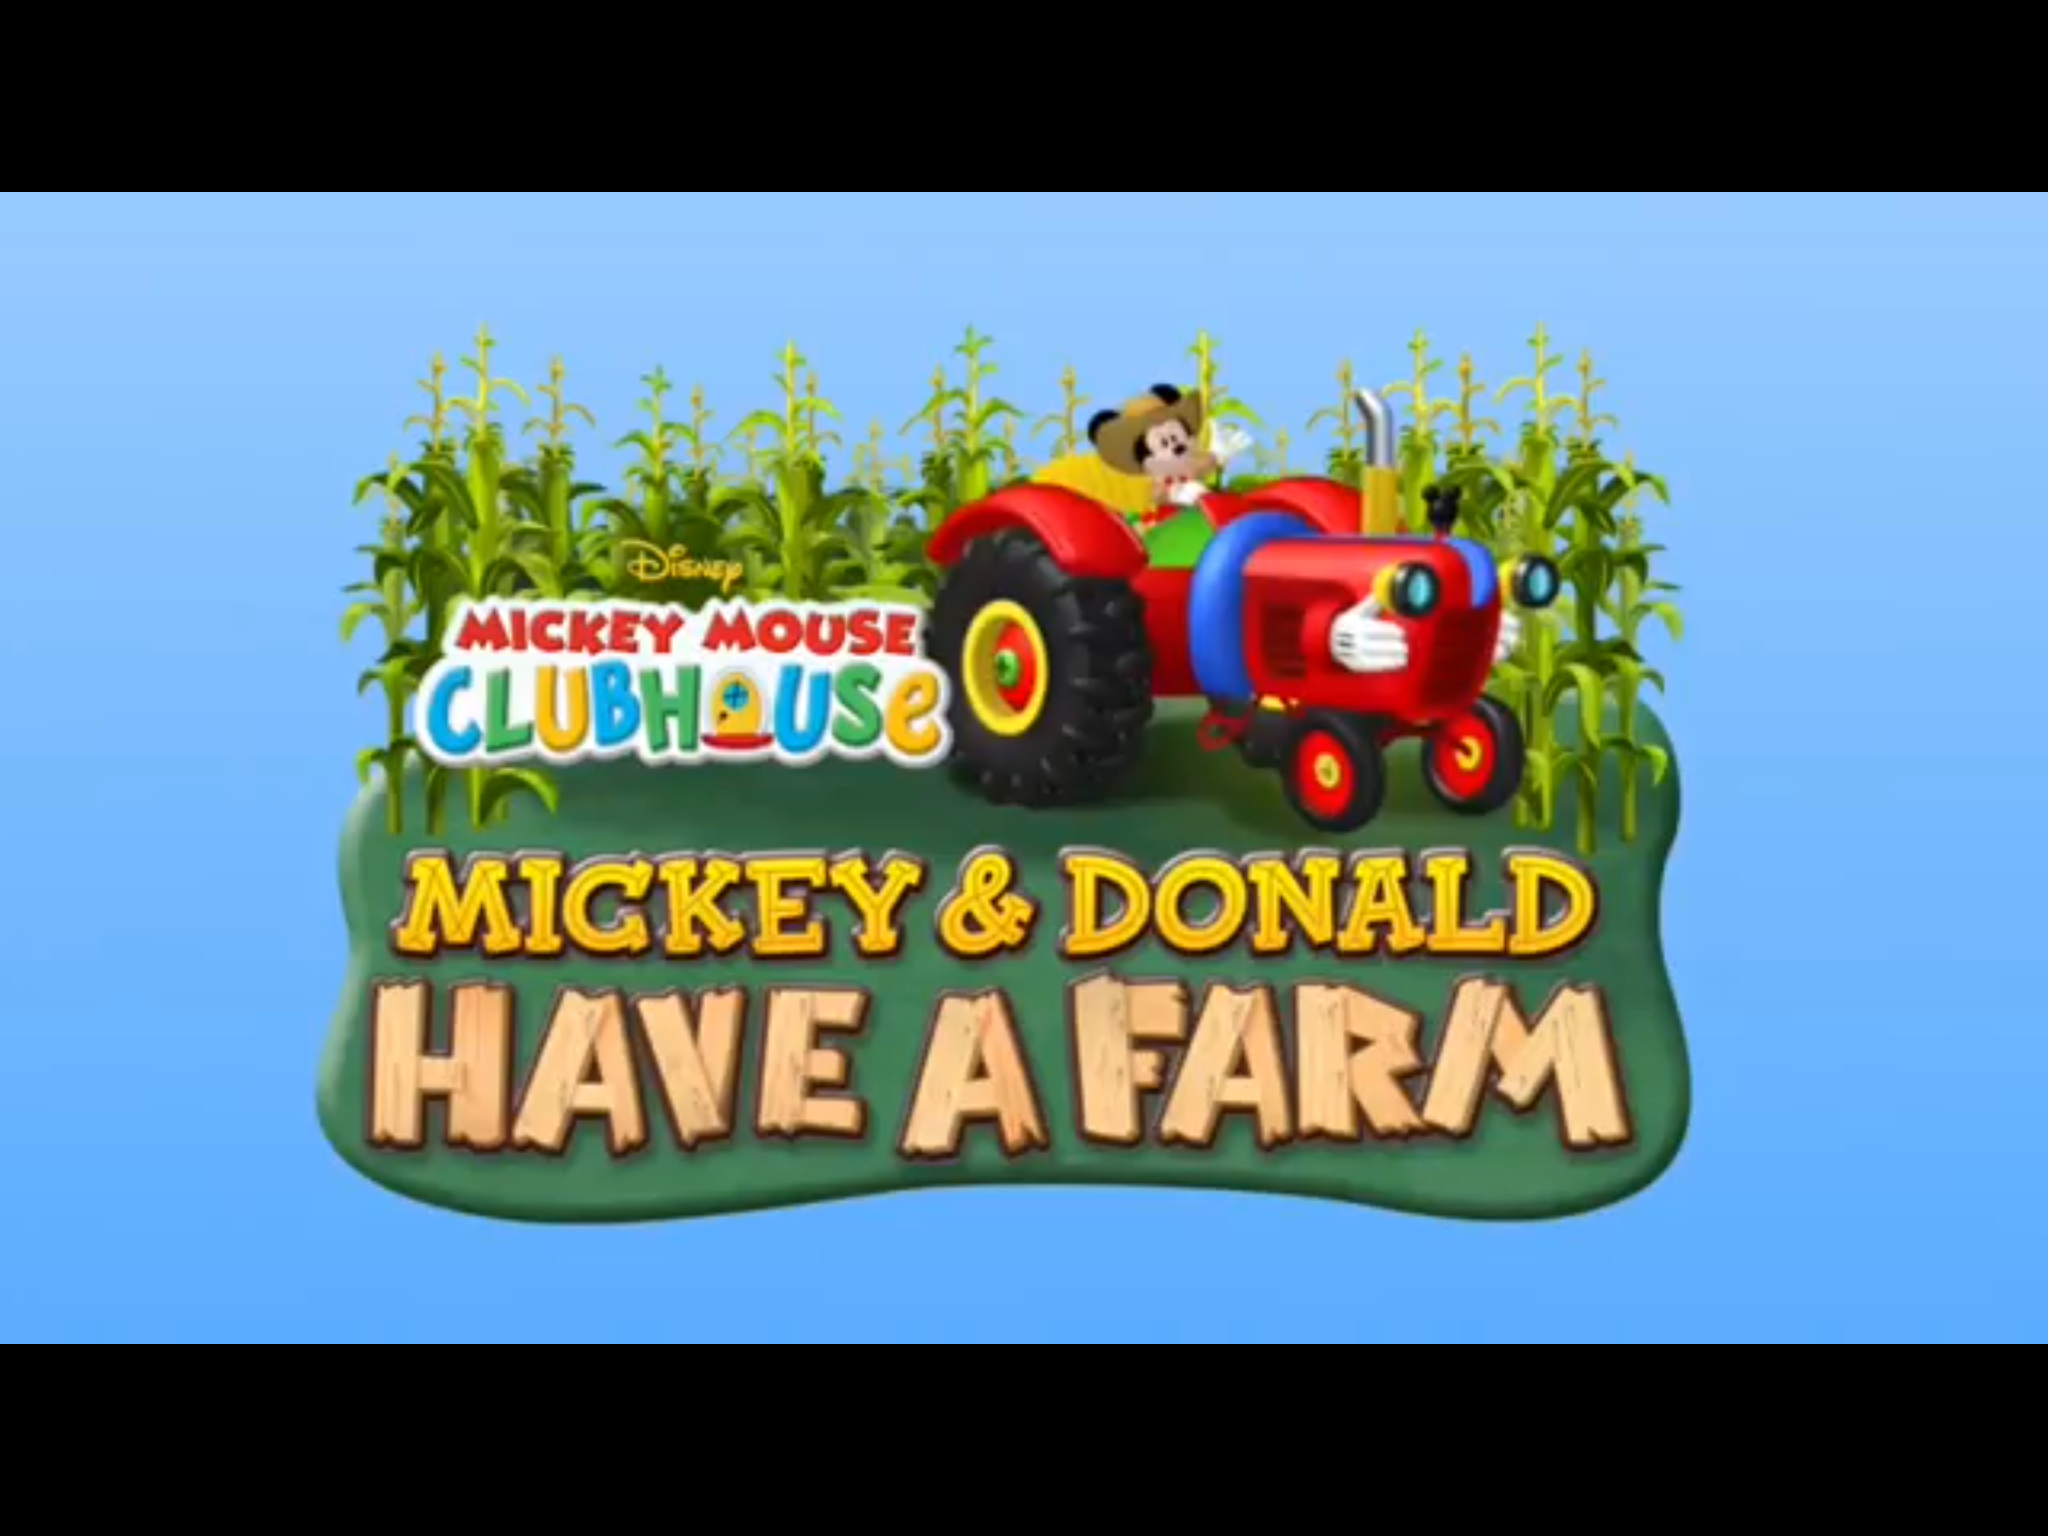 Donald and the Frog Prince, S1 E8, Full Episode, Mickey Mouse Clubhouse